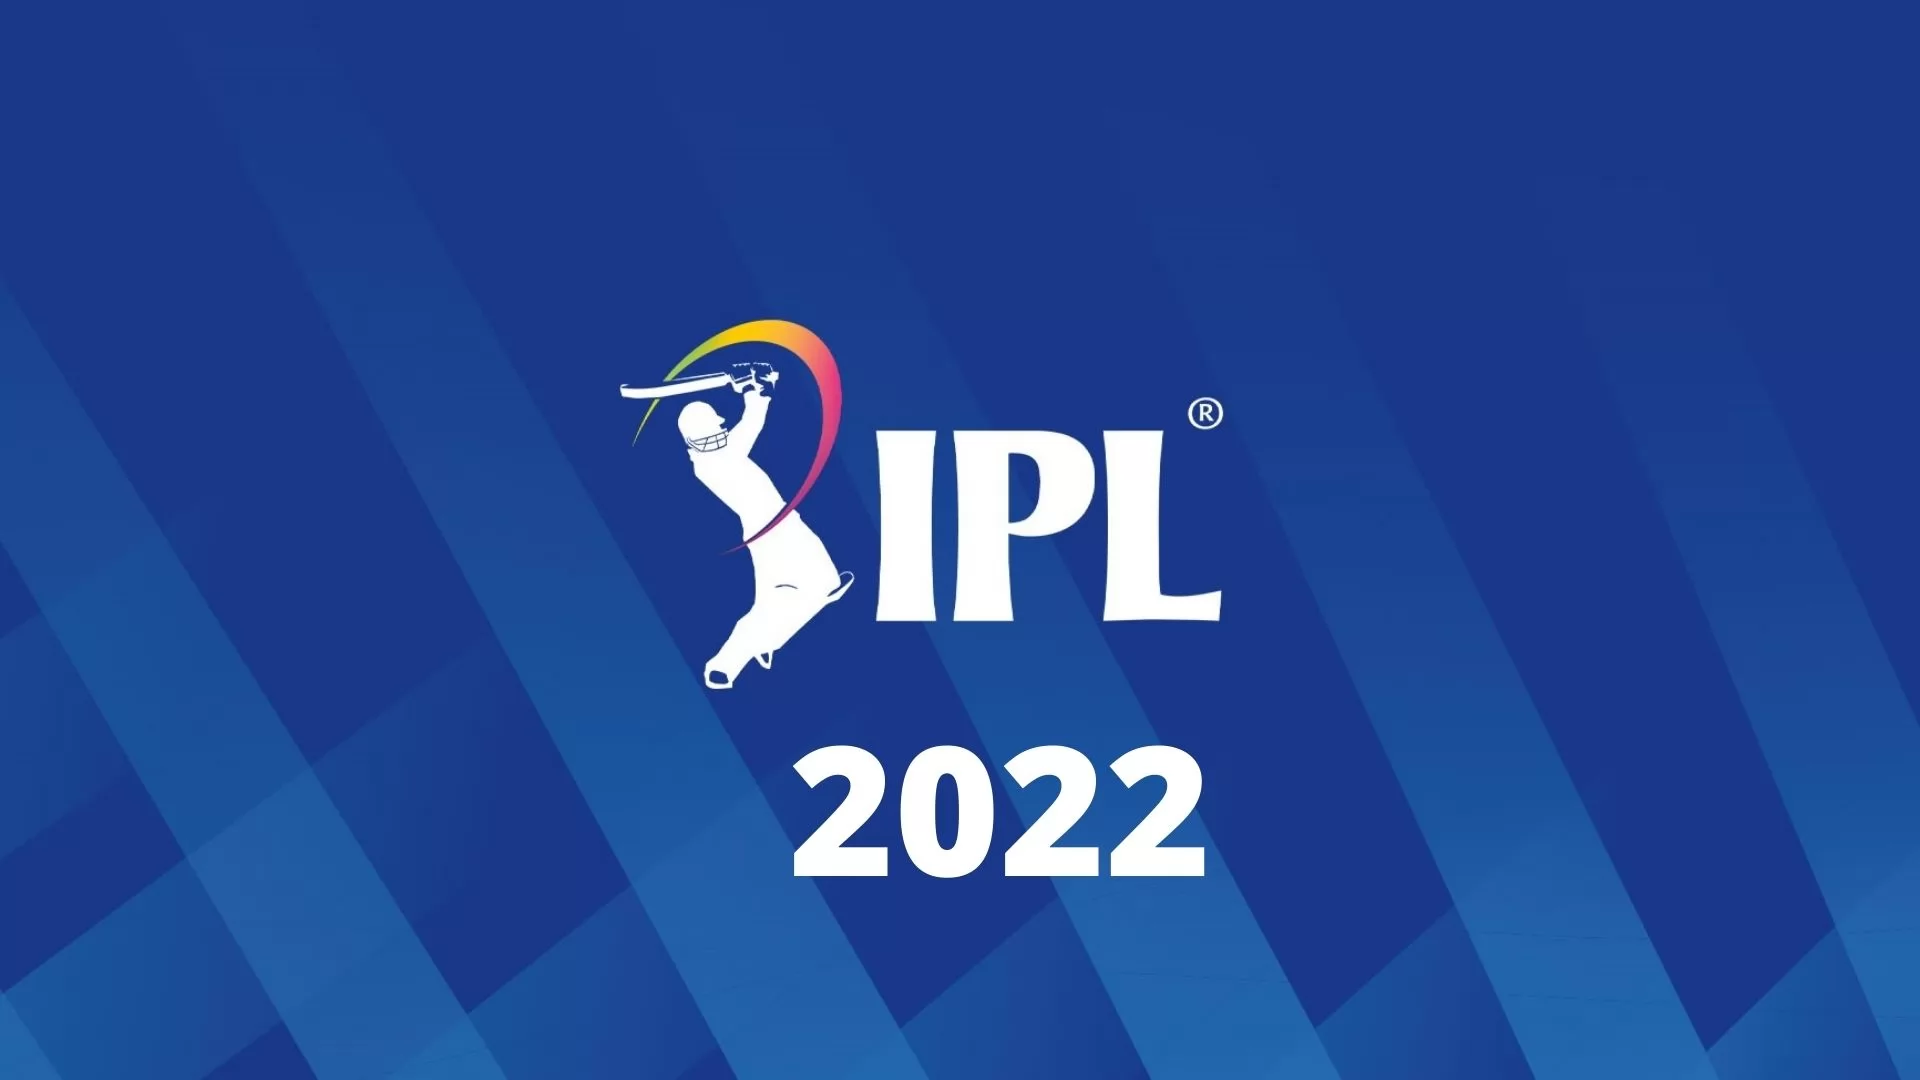 Tata IPL Live Streaming Channels in India 2022